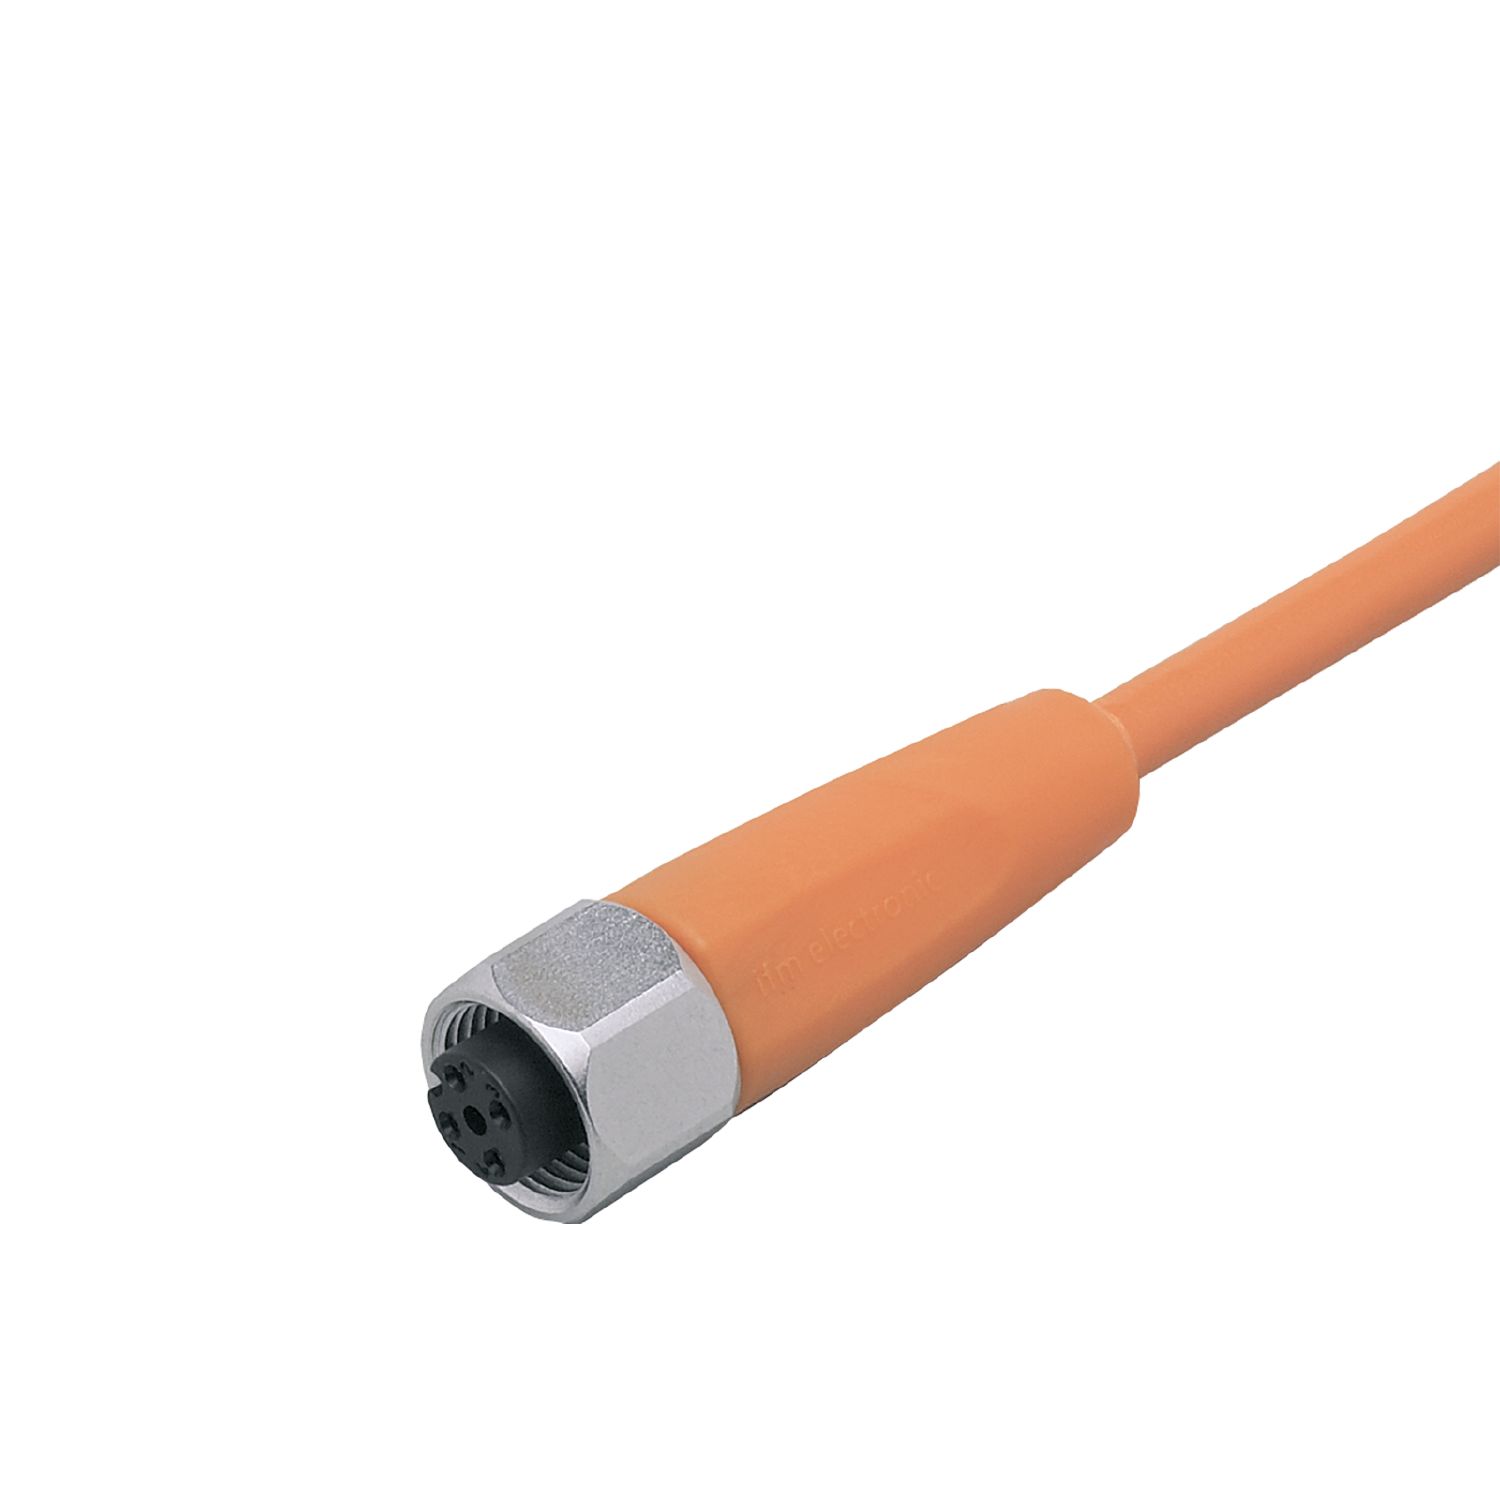 EVT064 - Connecting cable with socket - ifm